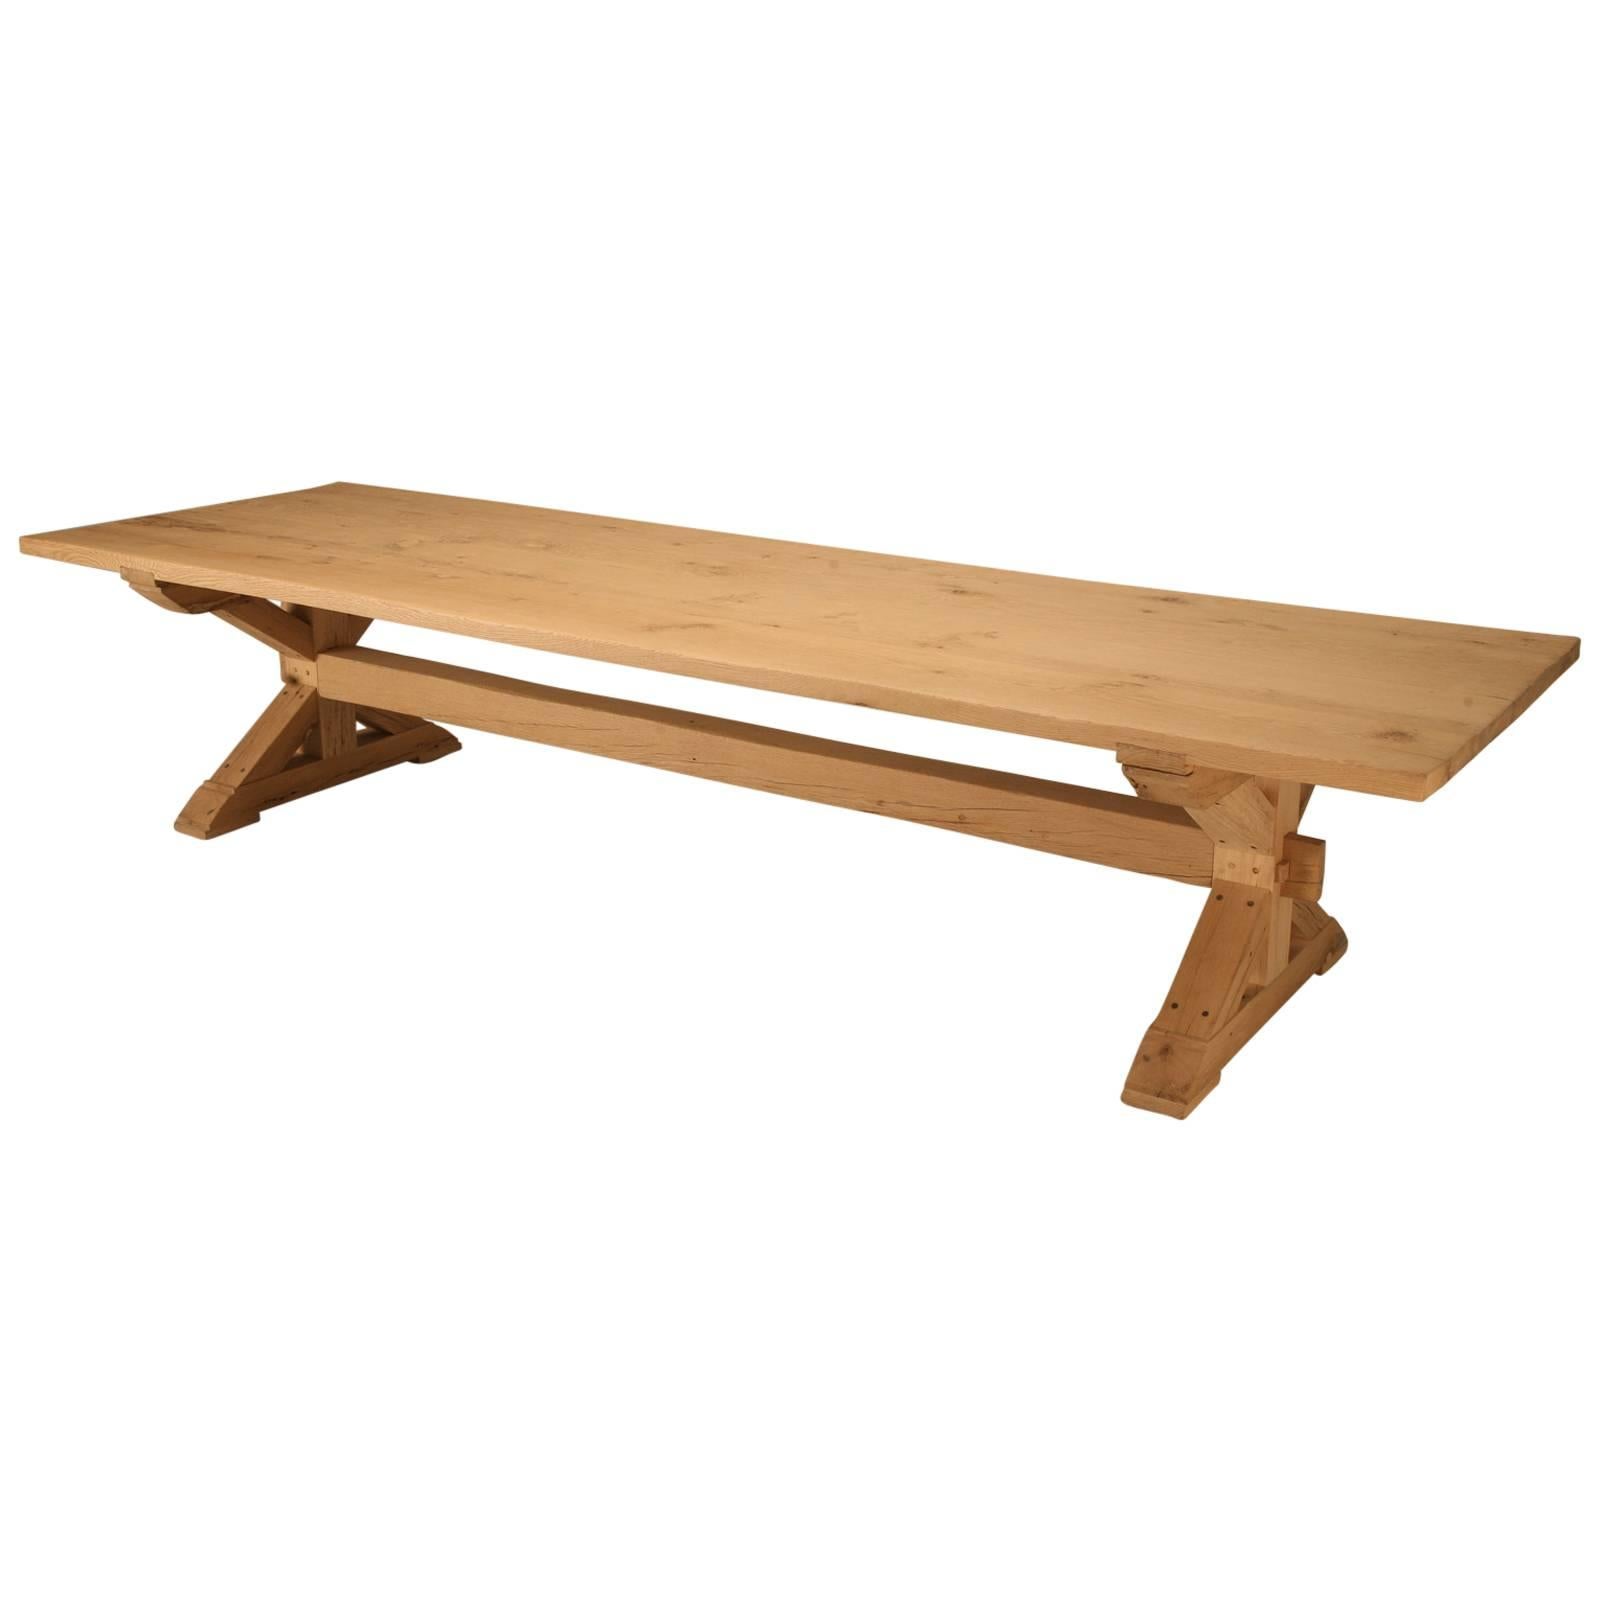 Custom-Made French Inspired Farm Table Reclaimed Oak Any Dimension By Old Plank For Sale